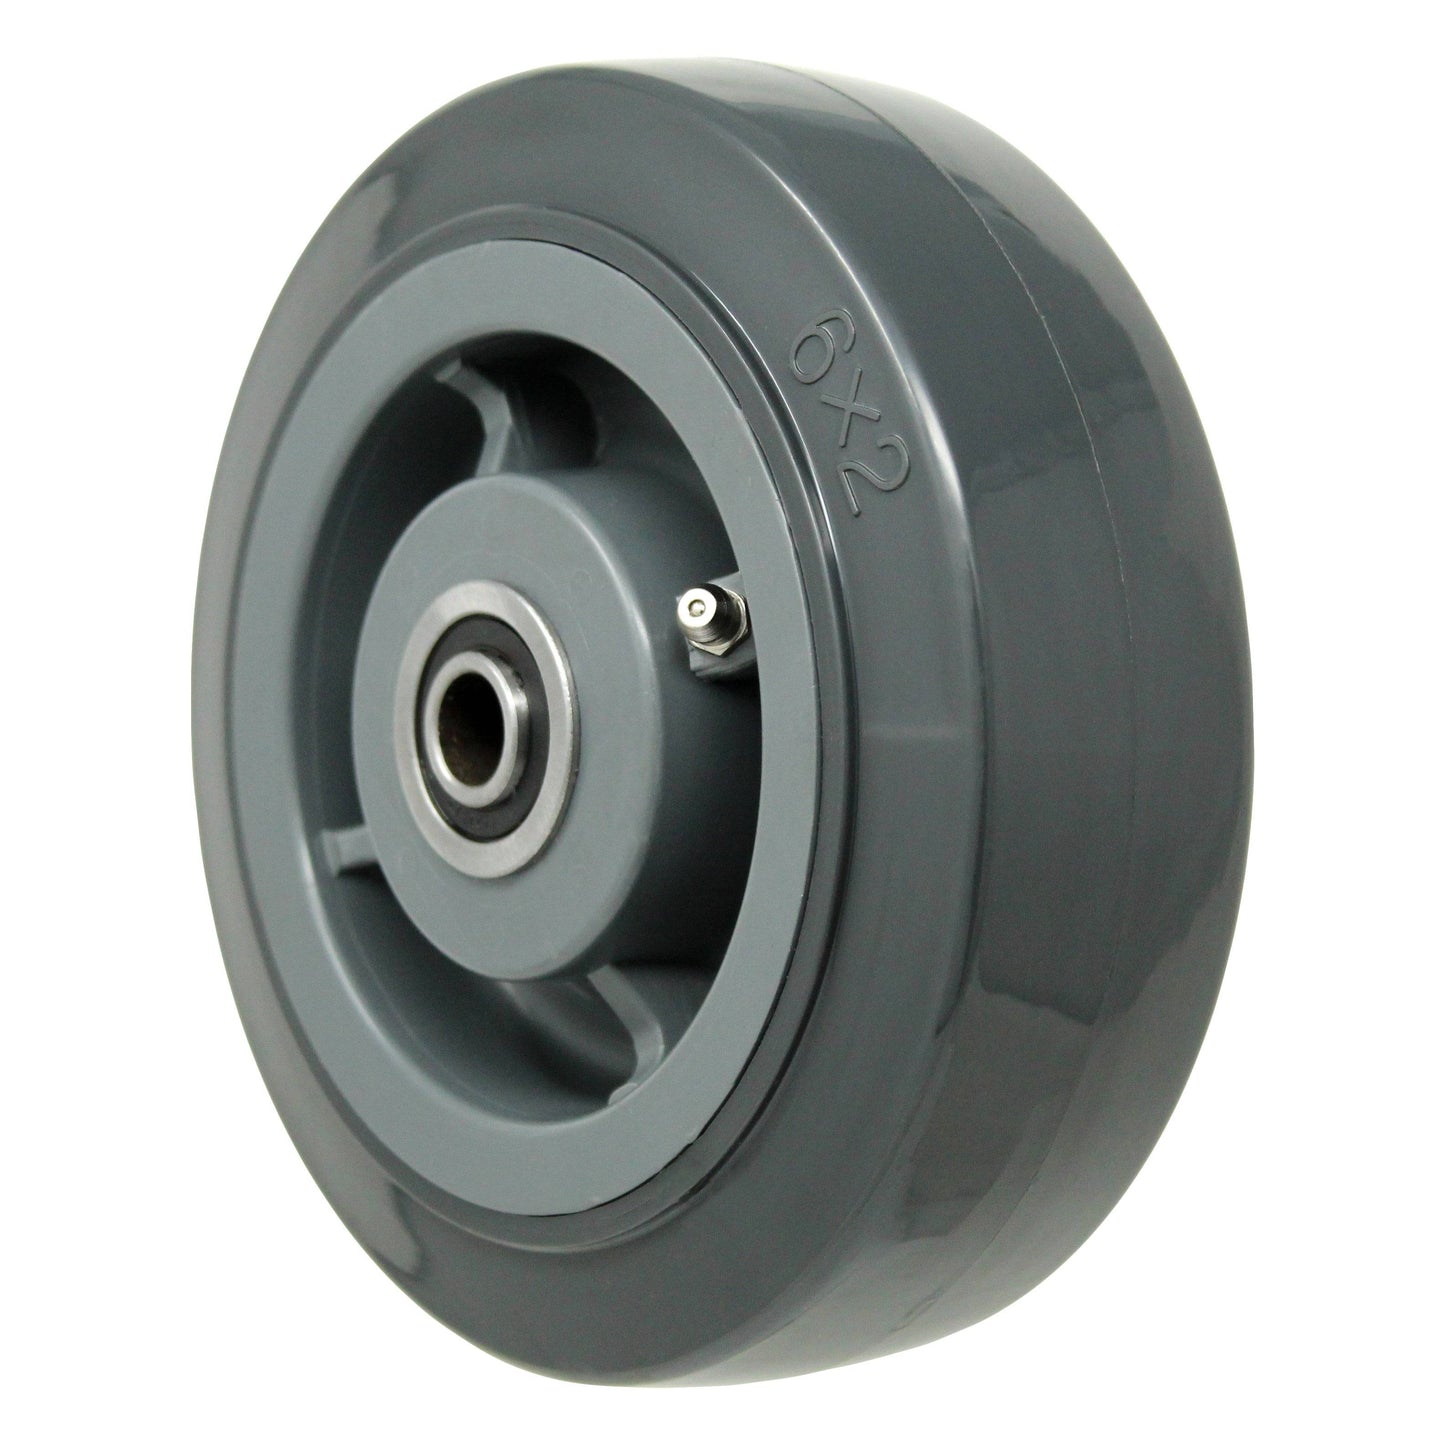 6" x 2" Polymadic Wheel 1/2" Precision Bearing - 900 lbs. Capacity - Durable Superior Casters